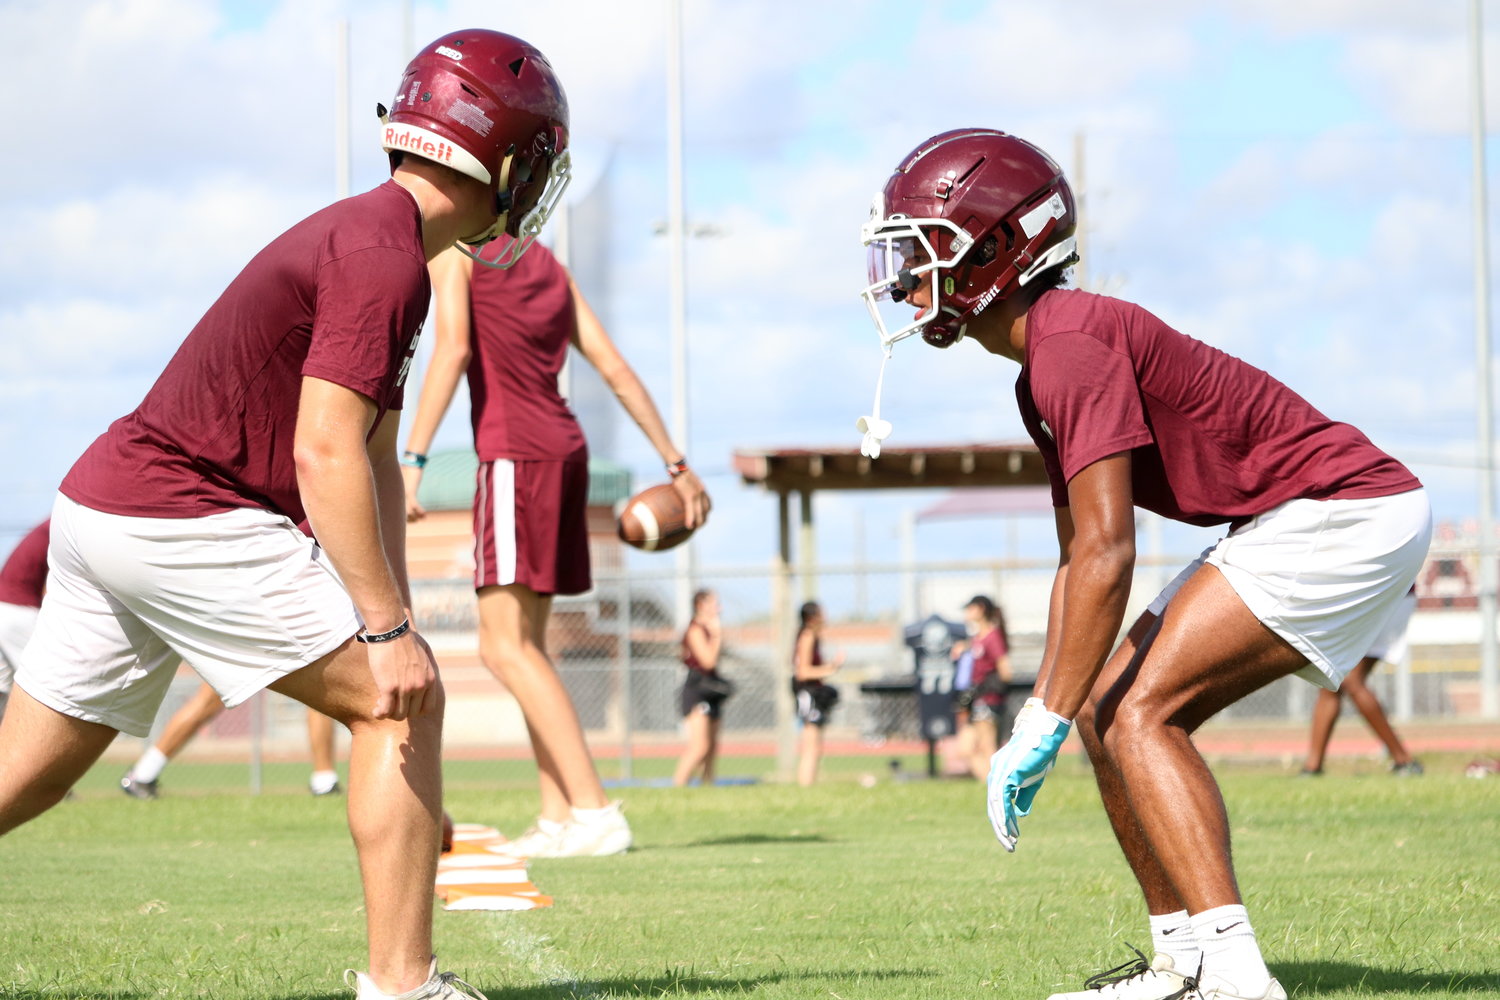 Taytum Johnson lines up to defend a receiver during Monday’s Cinco Ranch practice.